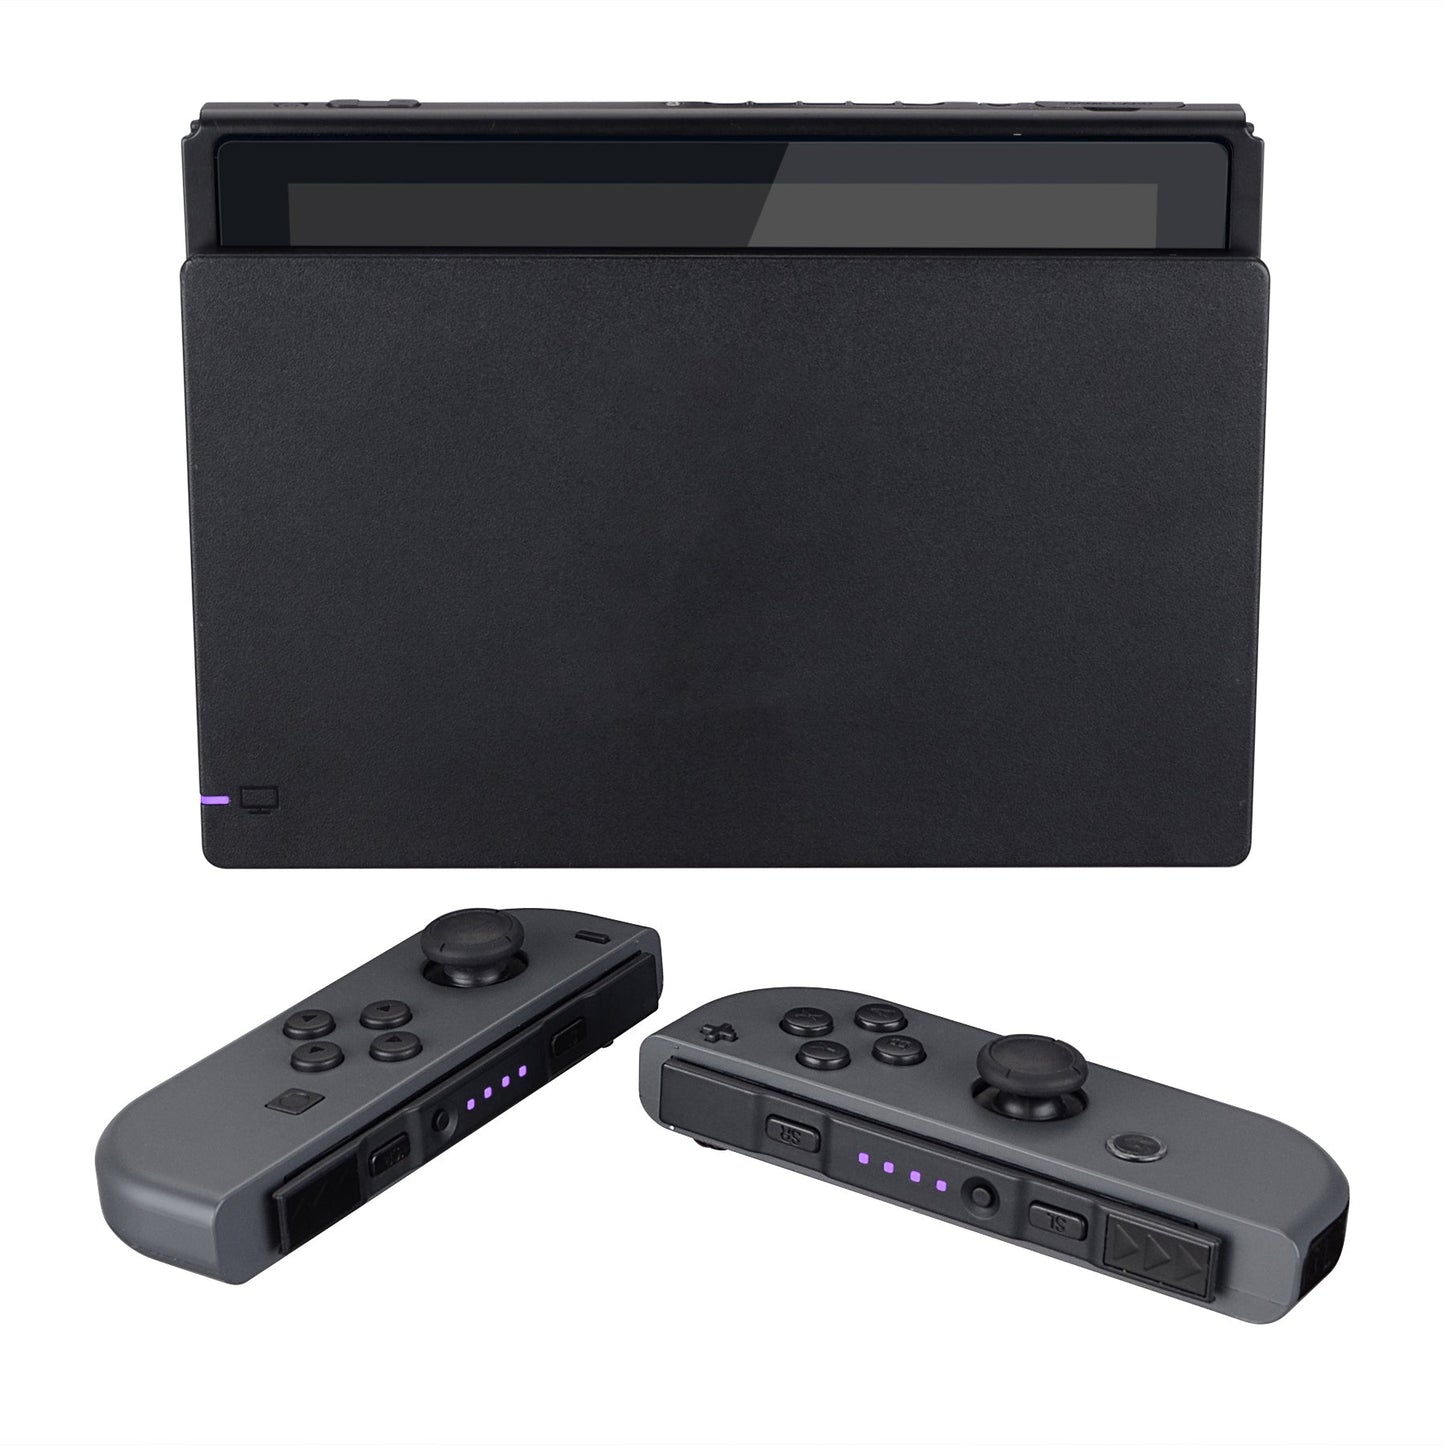 eXtremeRate Retail Violet Firefly LED Tuning Kit for NS Switch Joycons Dock NS Joycon SL SR Buttons Ribbon Flex Cable Indicate Power LED-Joycons Dock NOT Included - NSLED009